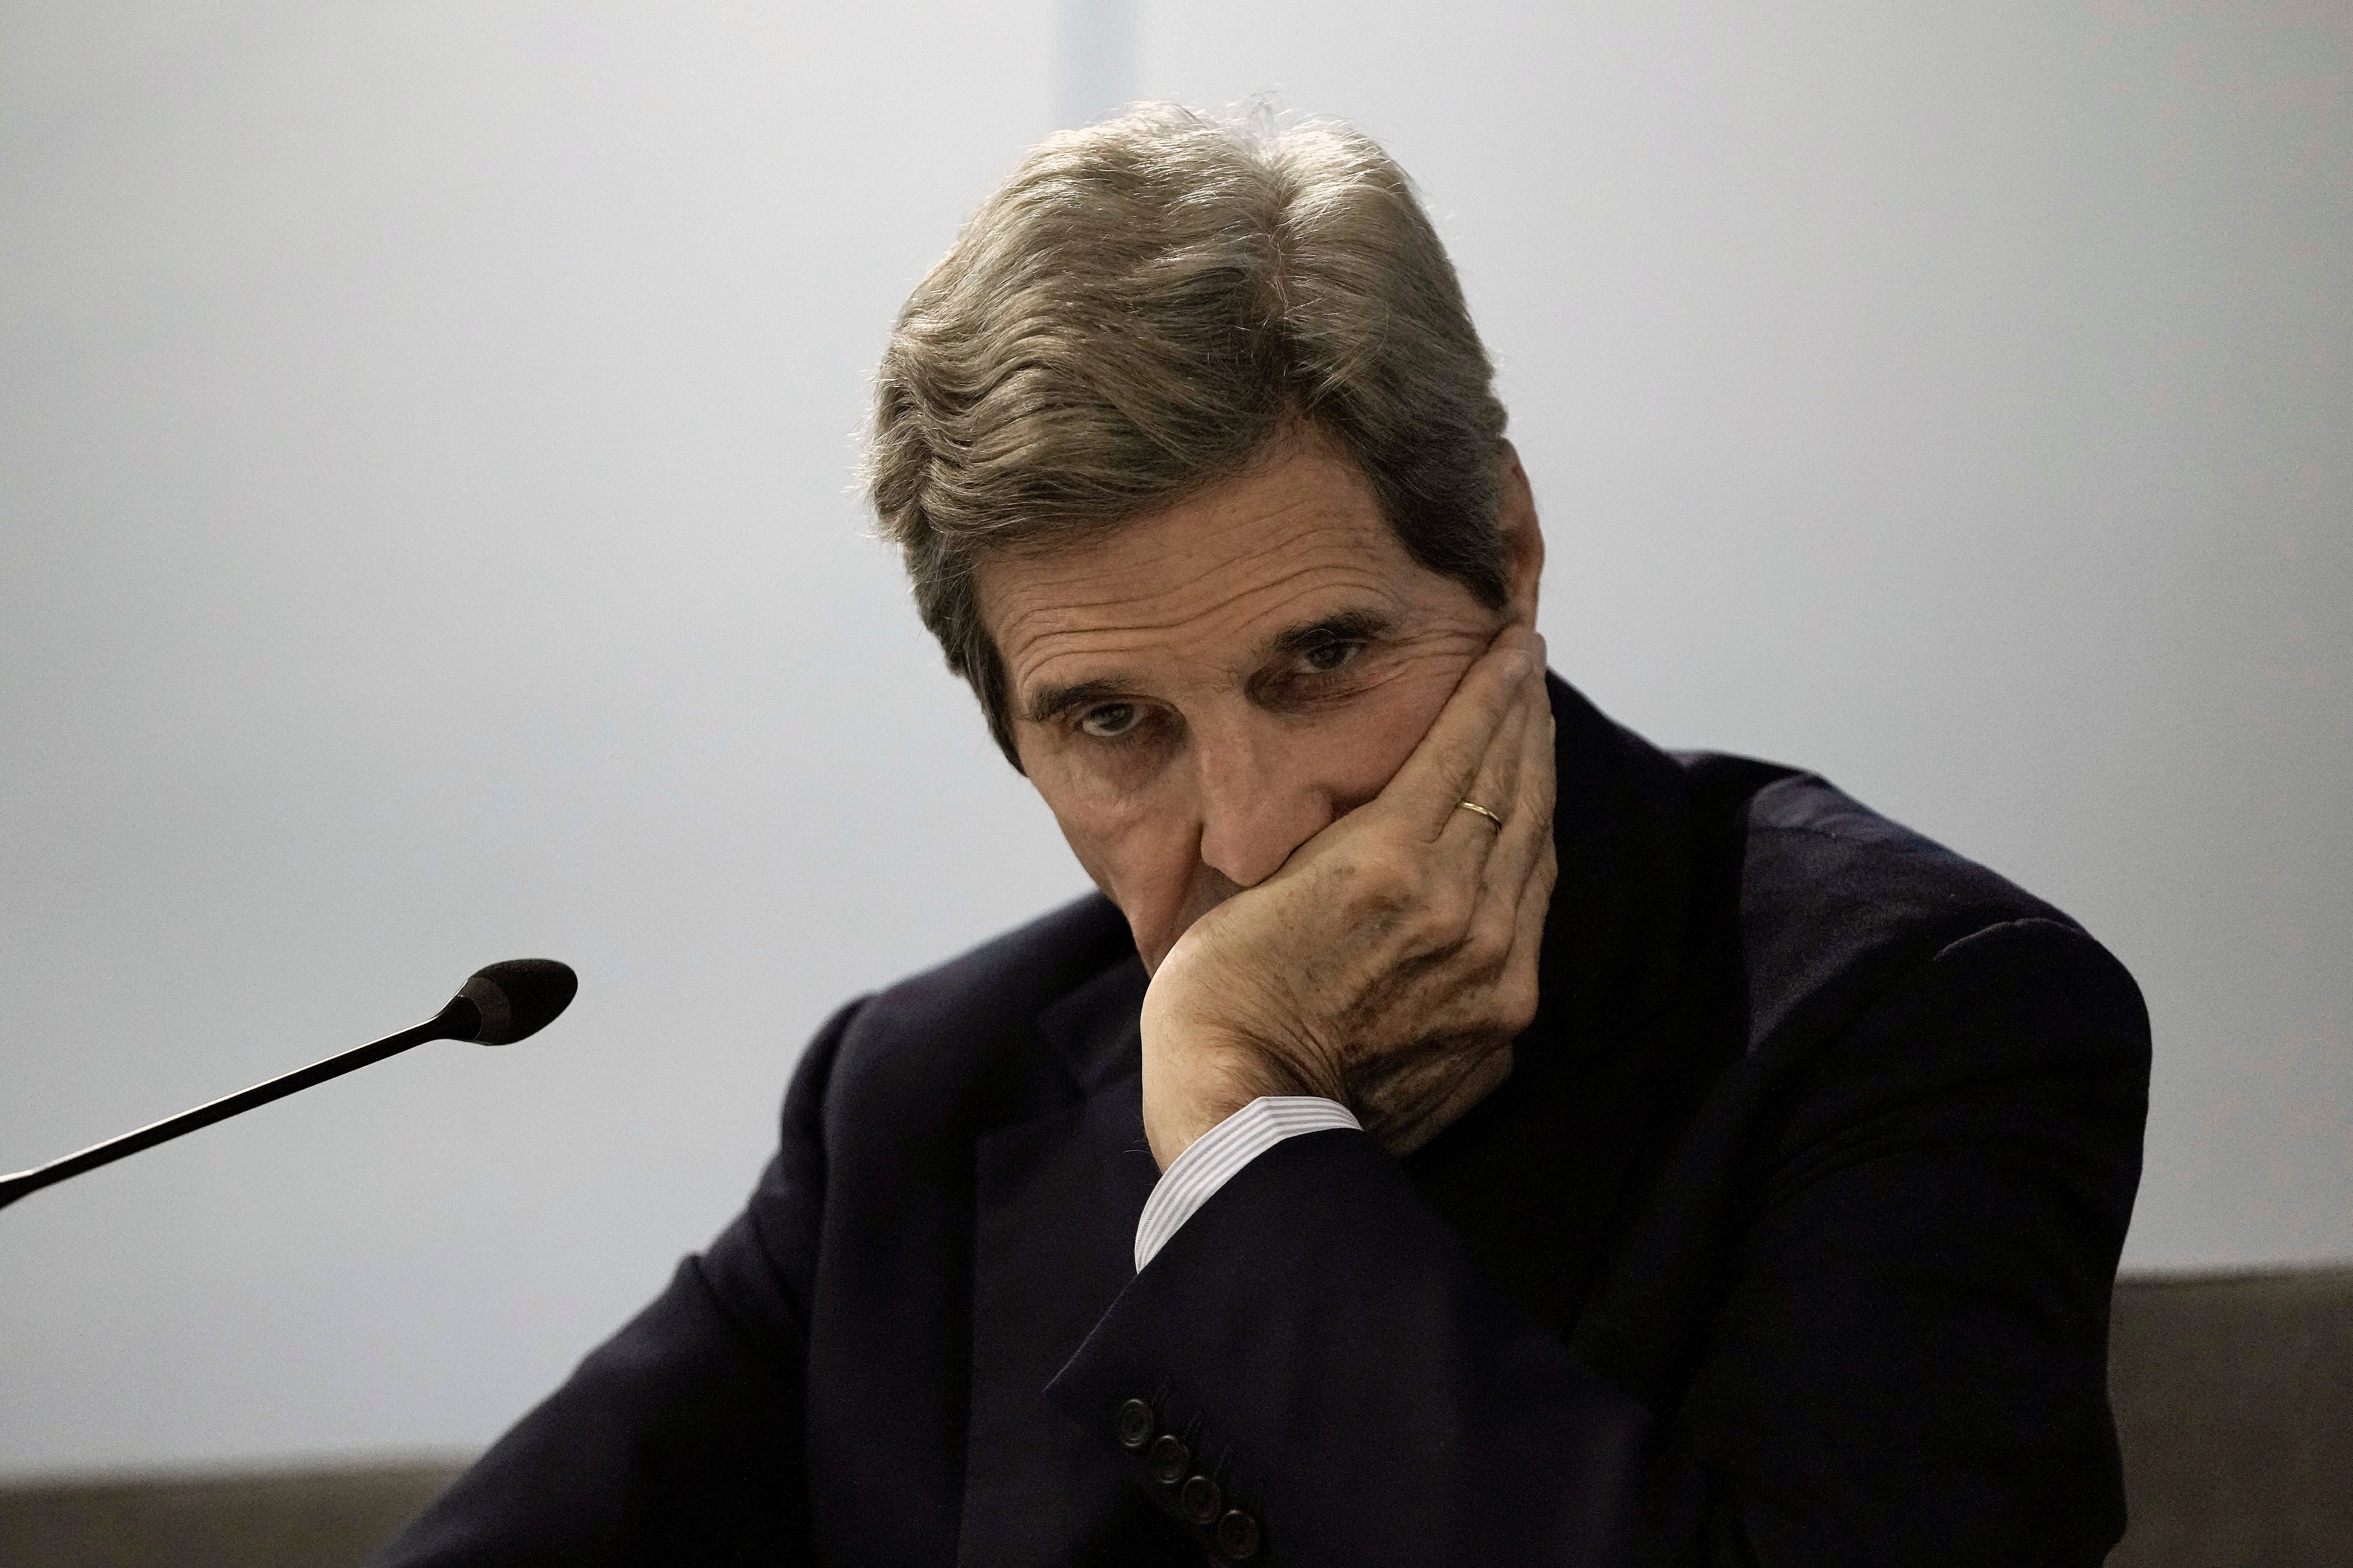 US climate envoy John Kerry has tested positive for Covid-19 at Cop27 in Egypt